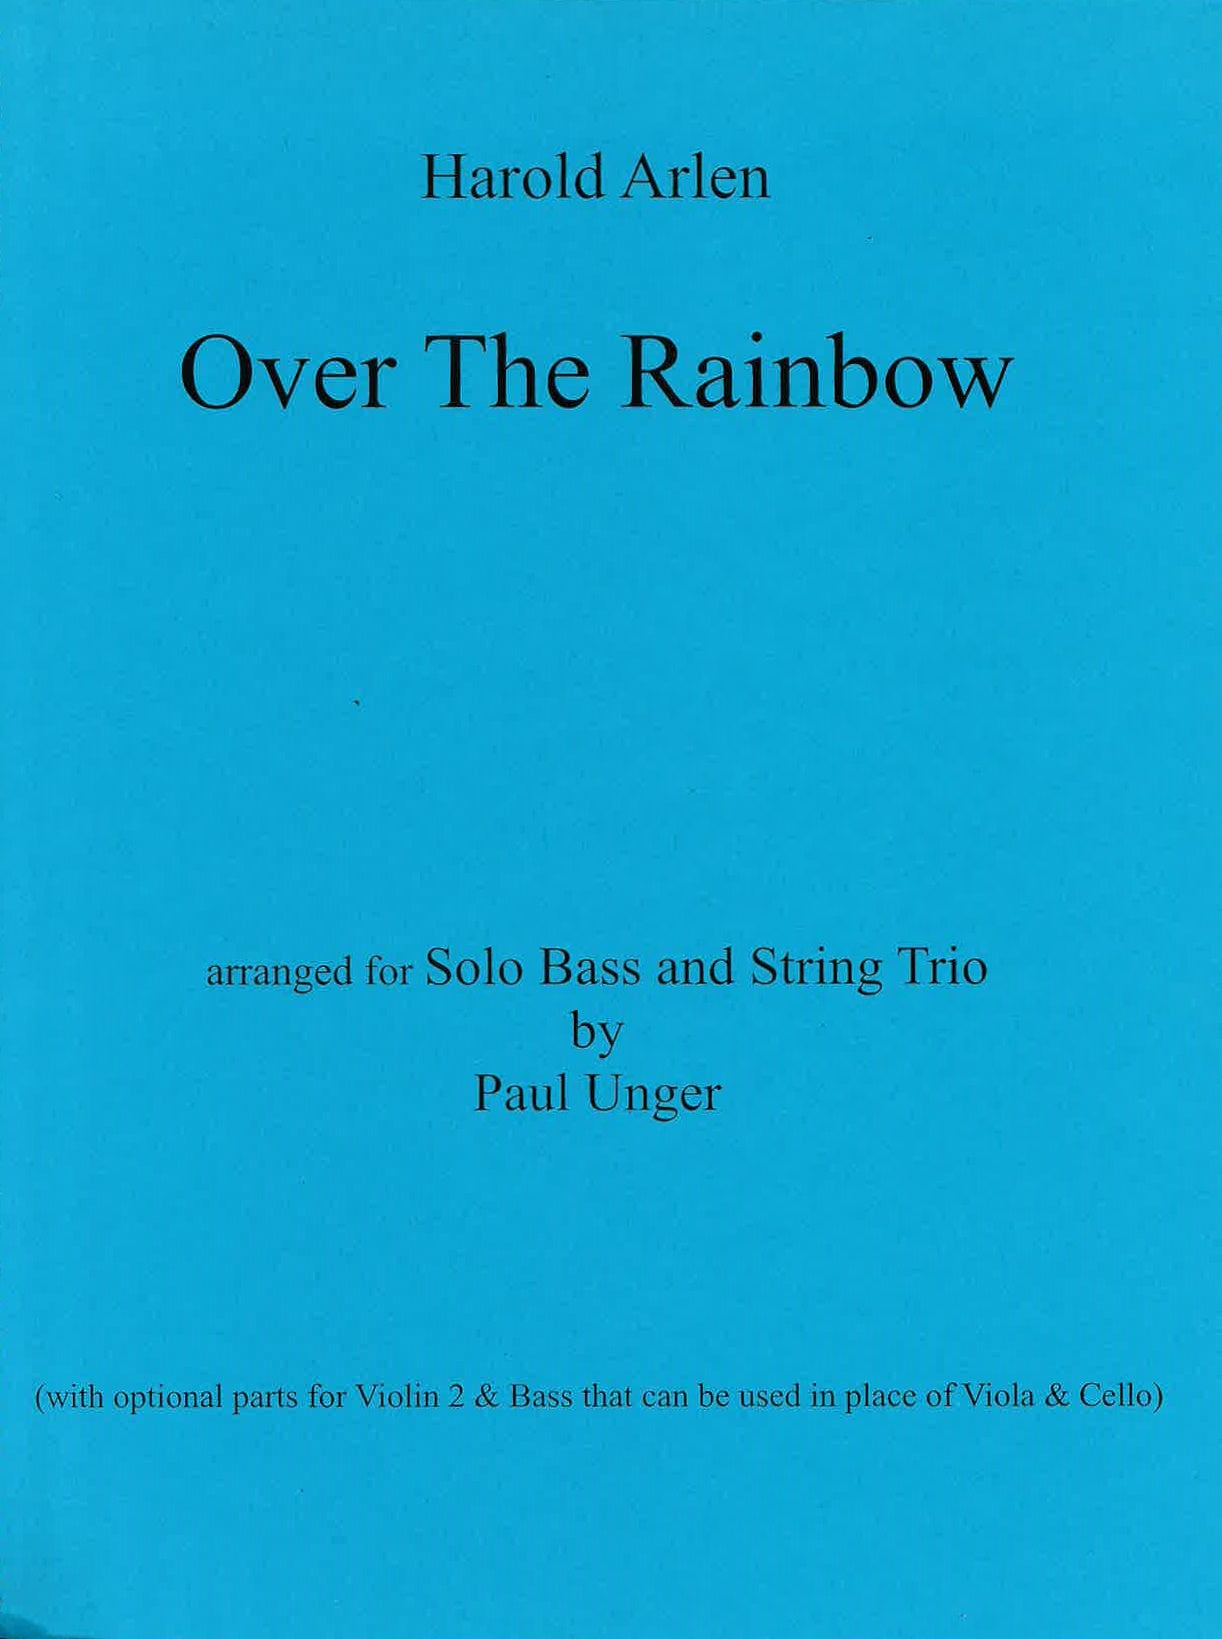 Arlen: Over The Rainbow Arranged by Paul Unger for Solo Bass & String Trio